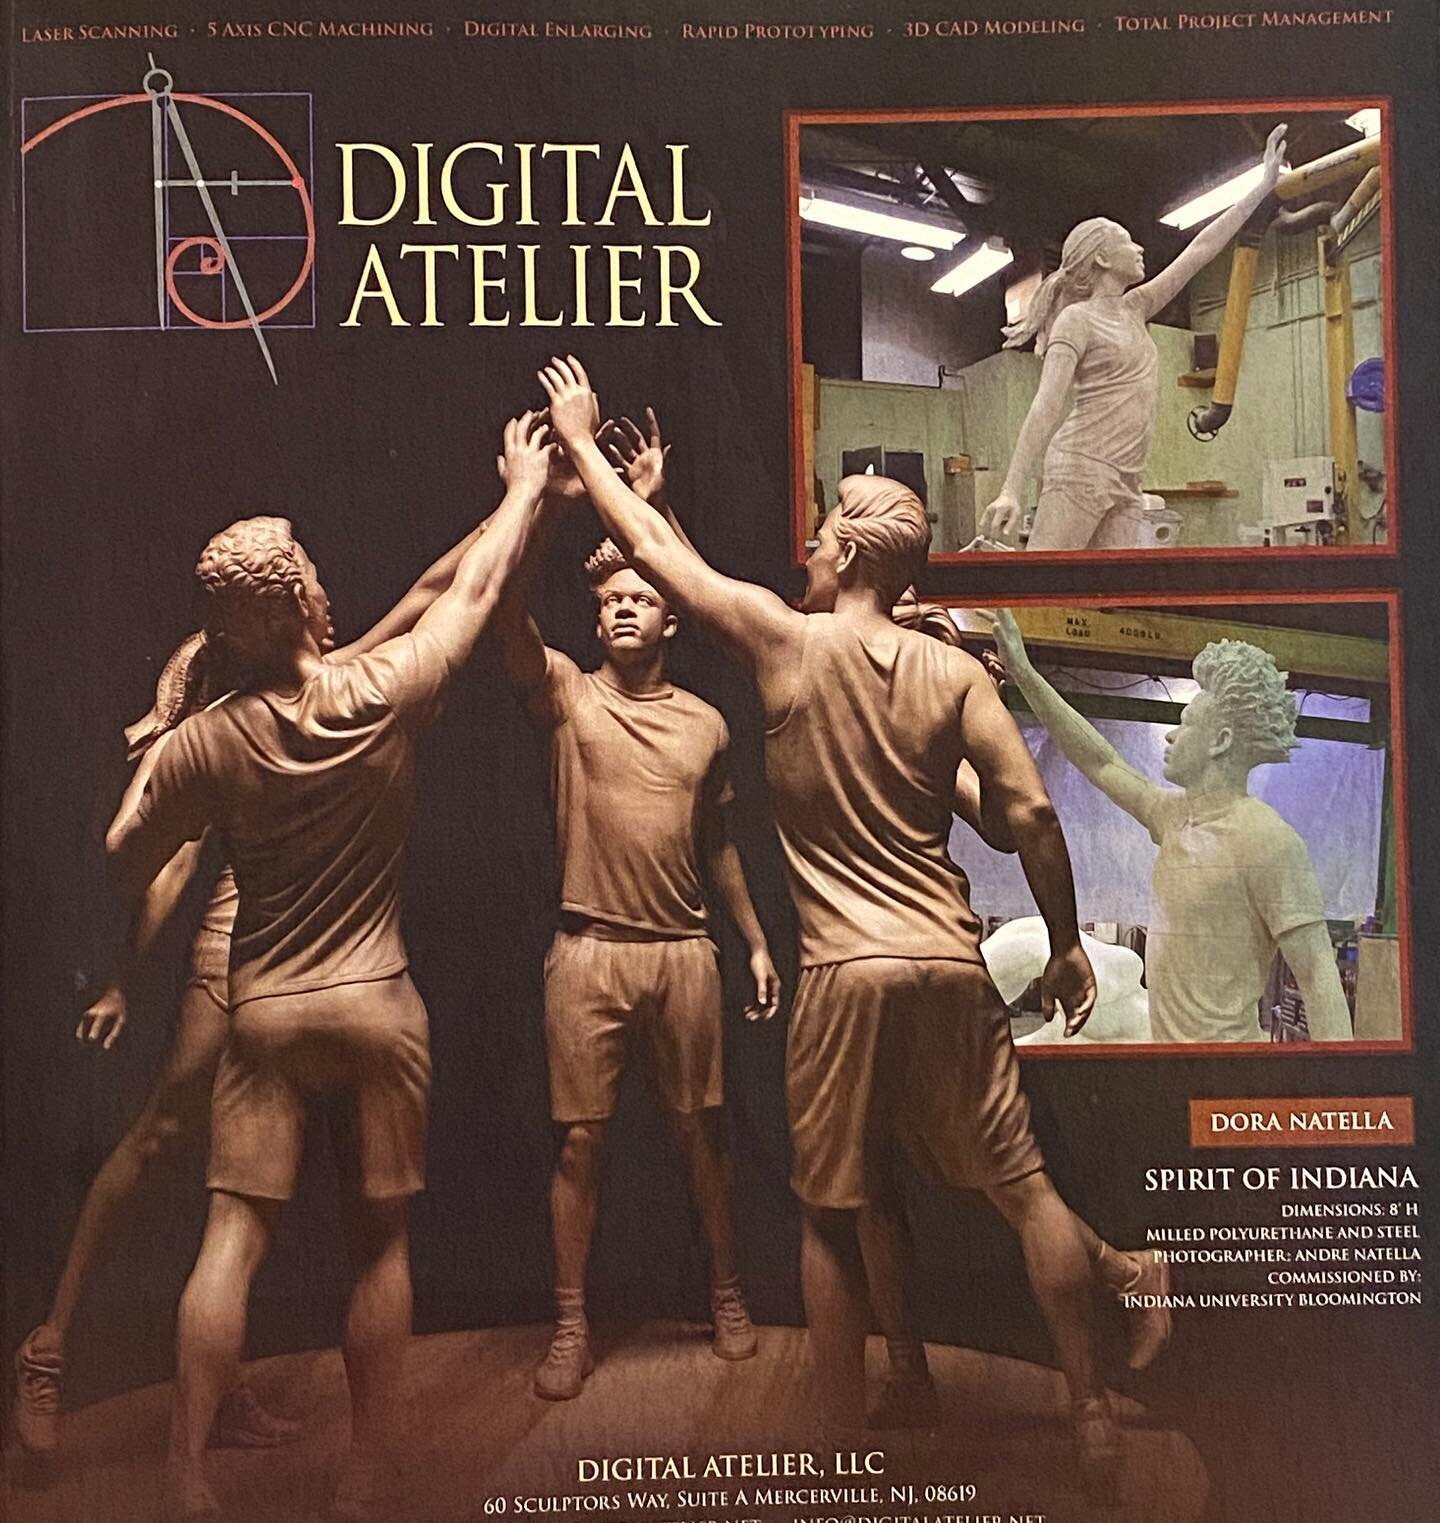 Digital Atelier, produced beautiful milled enlargements of my Spirit of Indiana&rdquo;monument. I am over the moon!!! happy that they are using the image of the Spirit of Indiana to advertise in Sculpture magazine this month. #artofinstagram  #artist